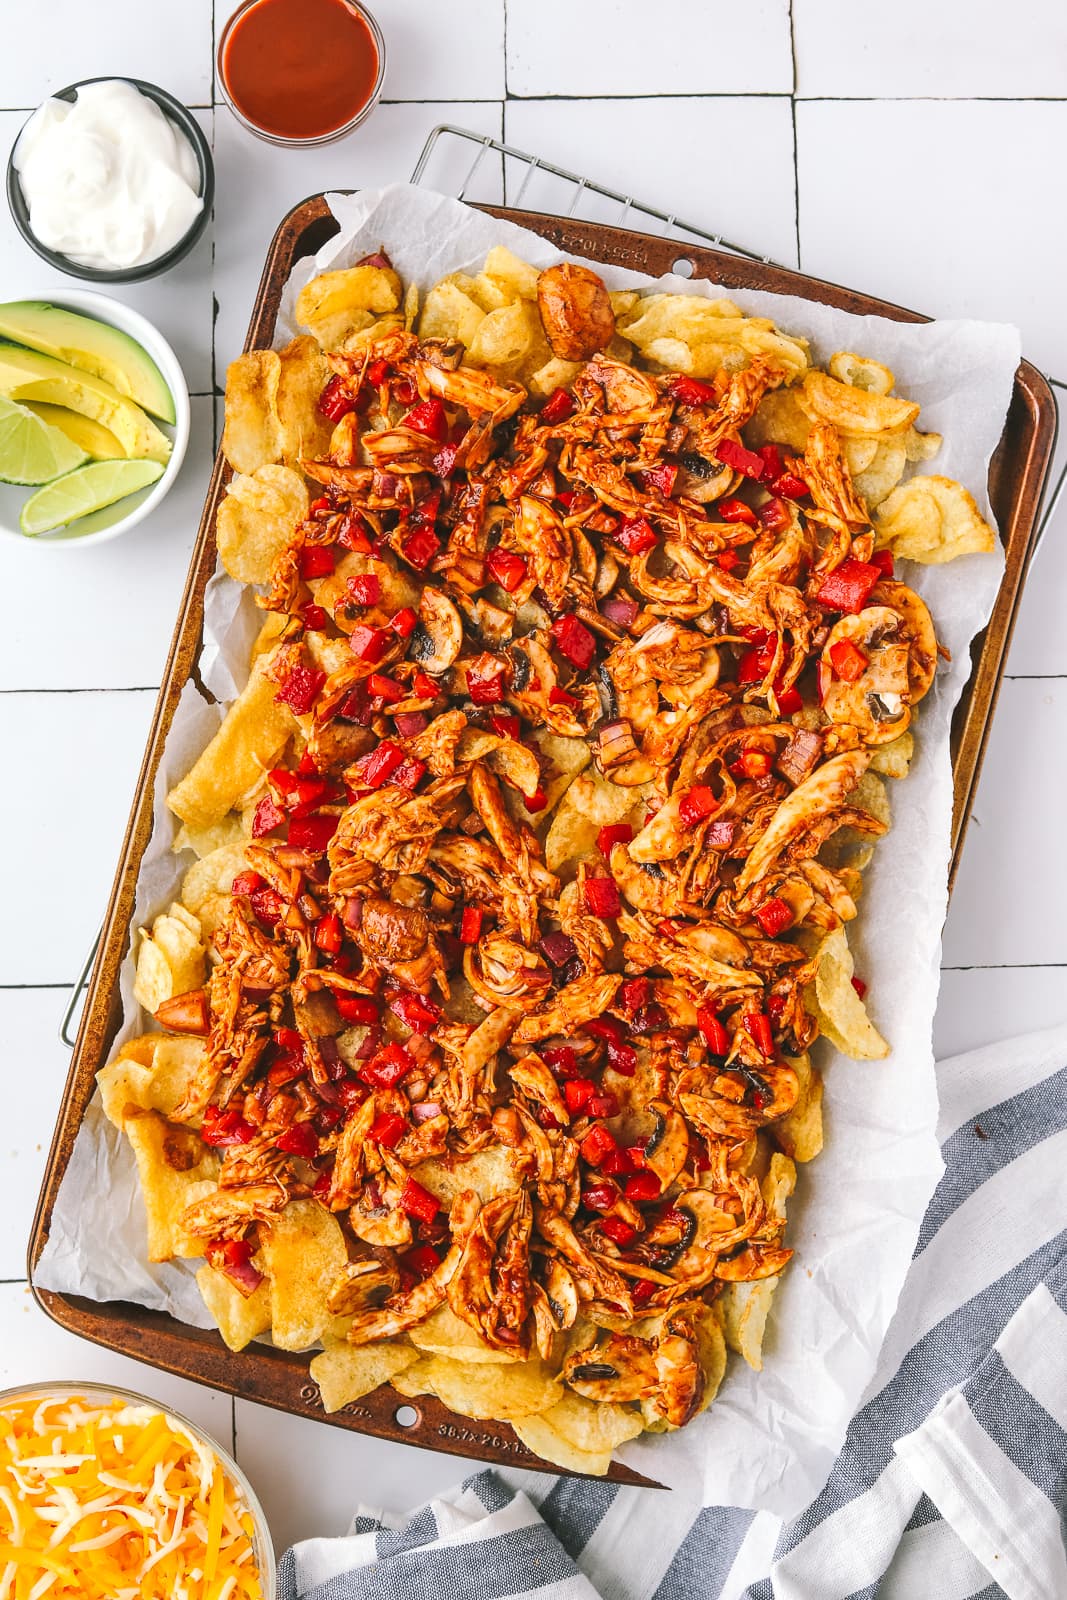 layers of chicken, red pepper on kettle chips